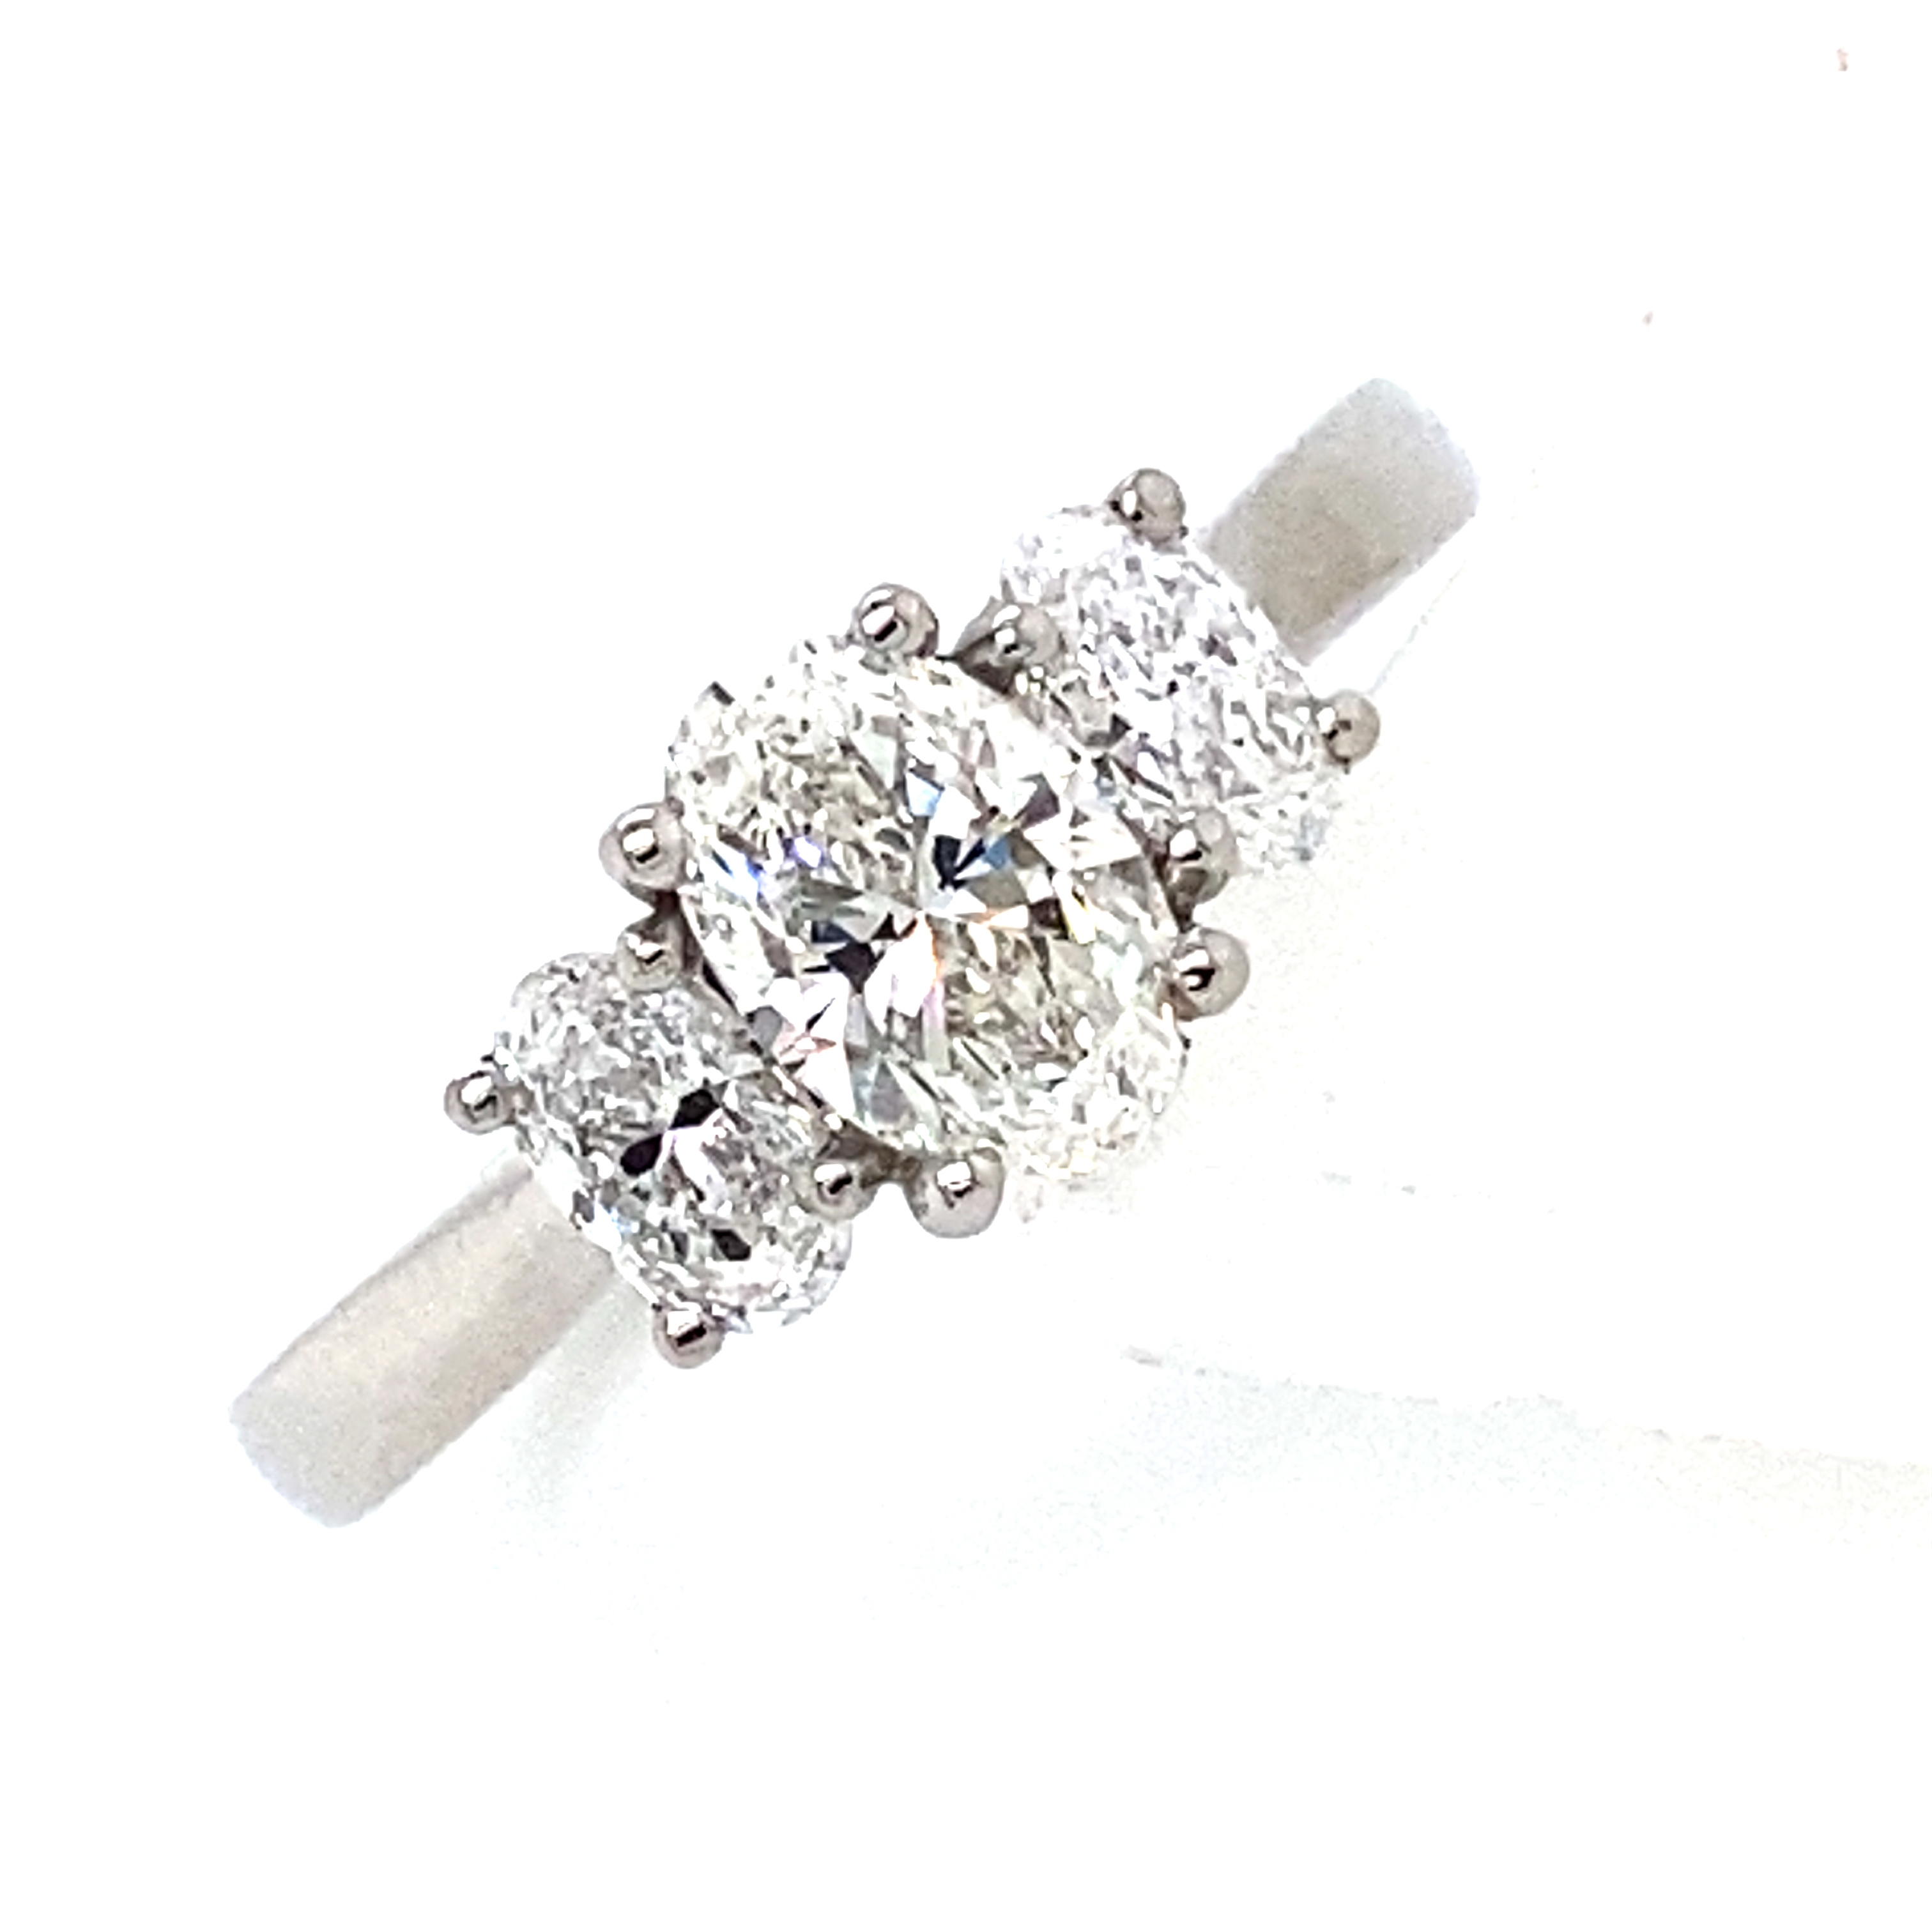 A Platinum and Oval Diamond 3 Stone Ring - 1.15 Carats